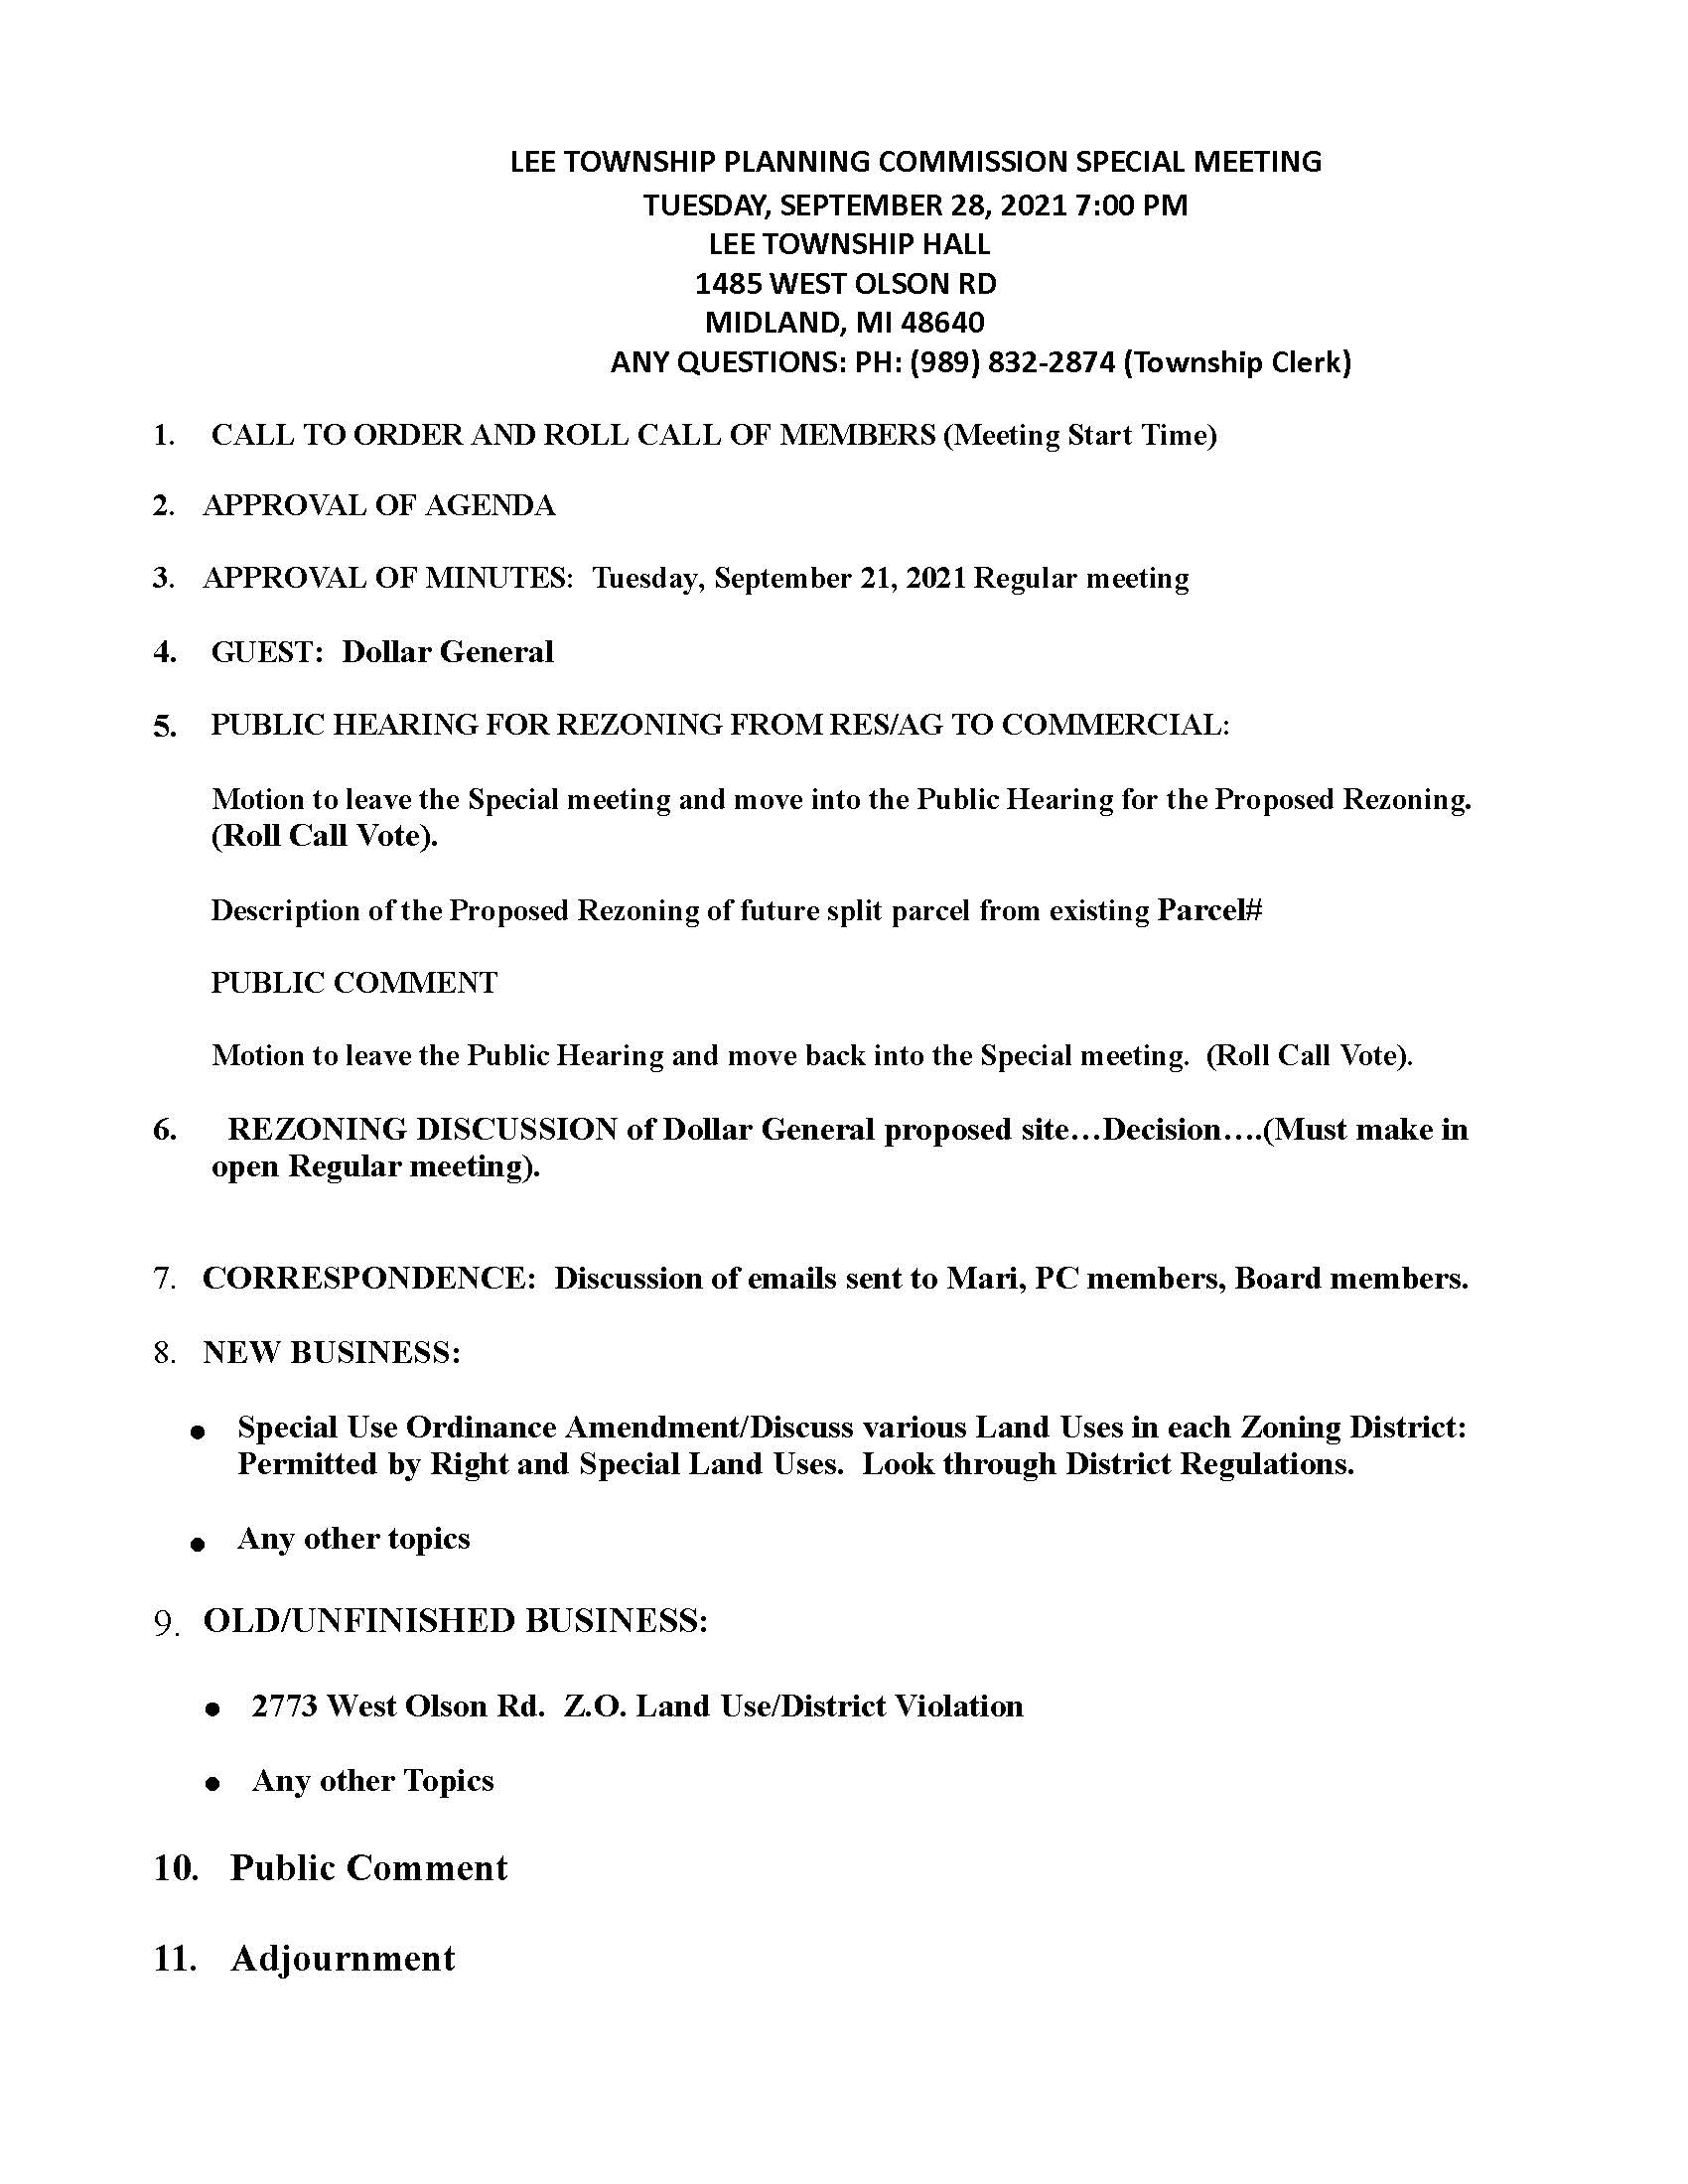 Special Meeting for Planning Commission on September 28, 2021